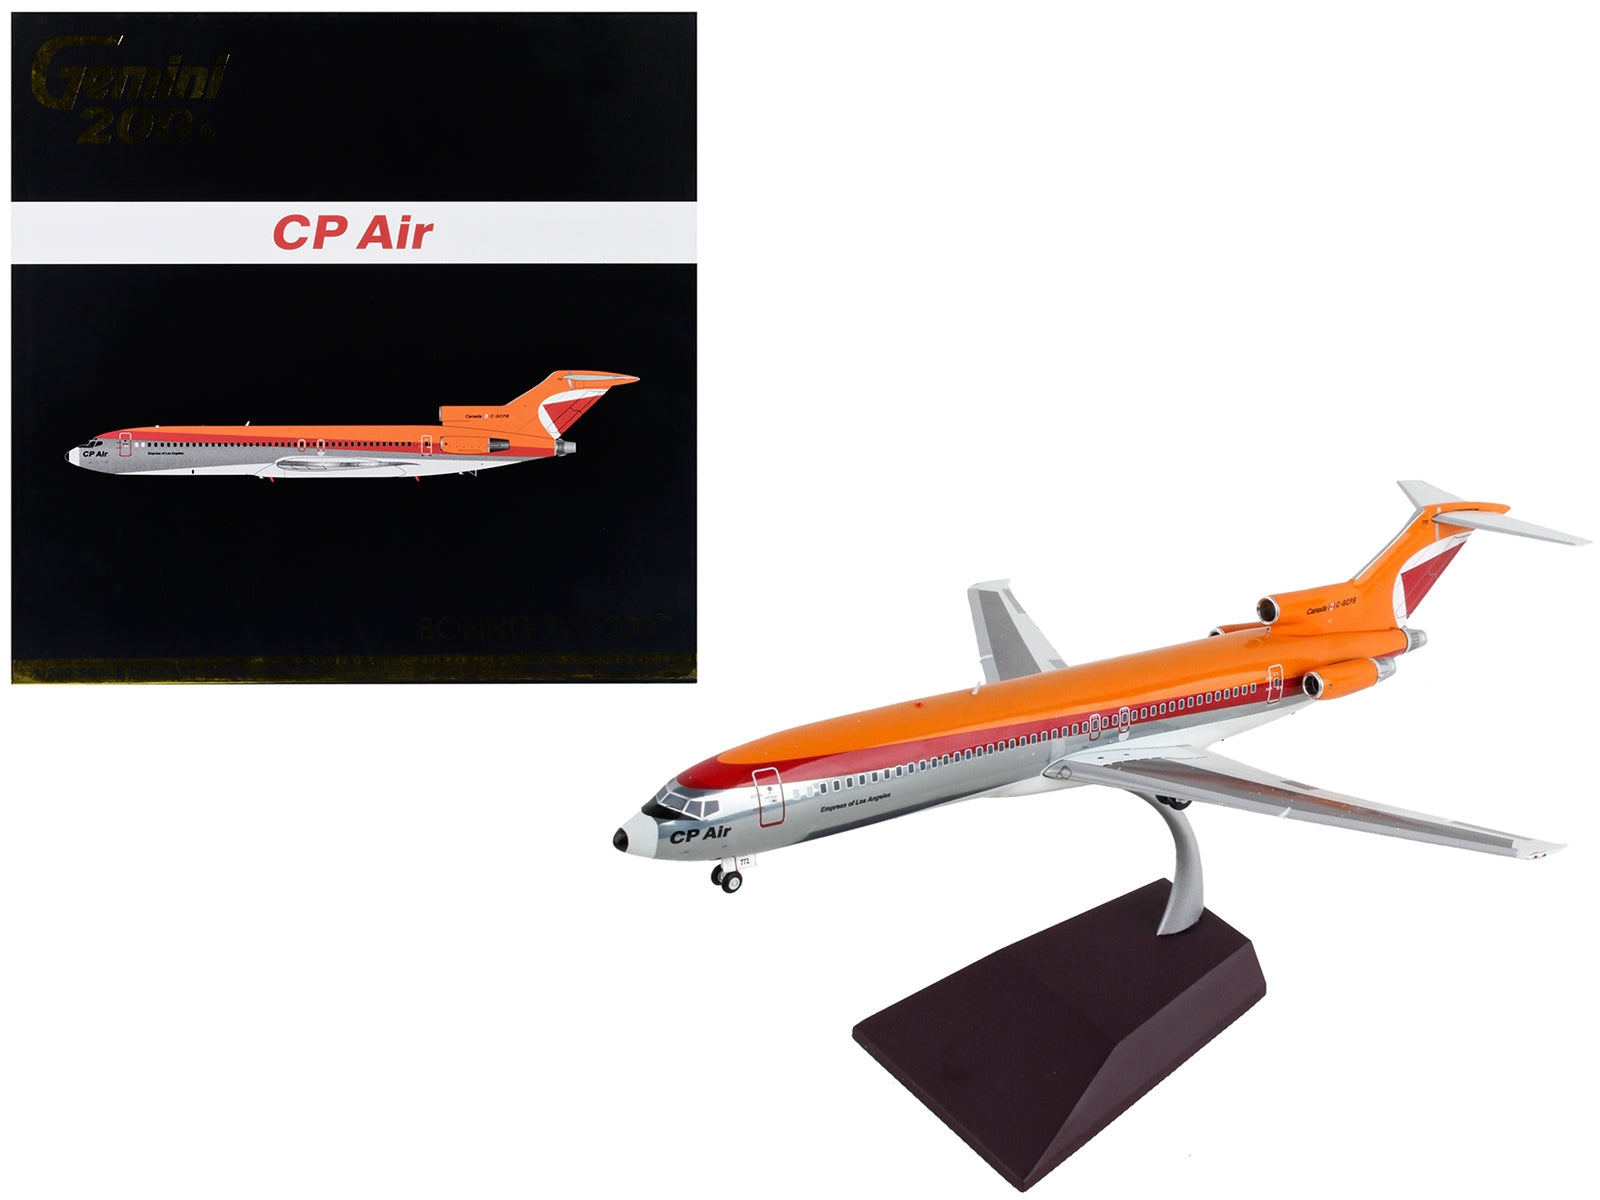 Boeing 727-200 Commercial Aircraft "CP Air" Orange and Silver with Red Stripes "Gemini 200" Series 1/200 Diecast Model Airplane by GeminiJets